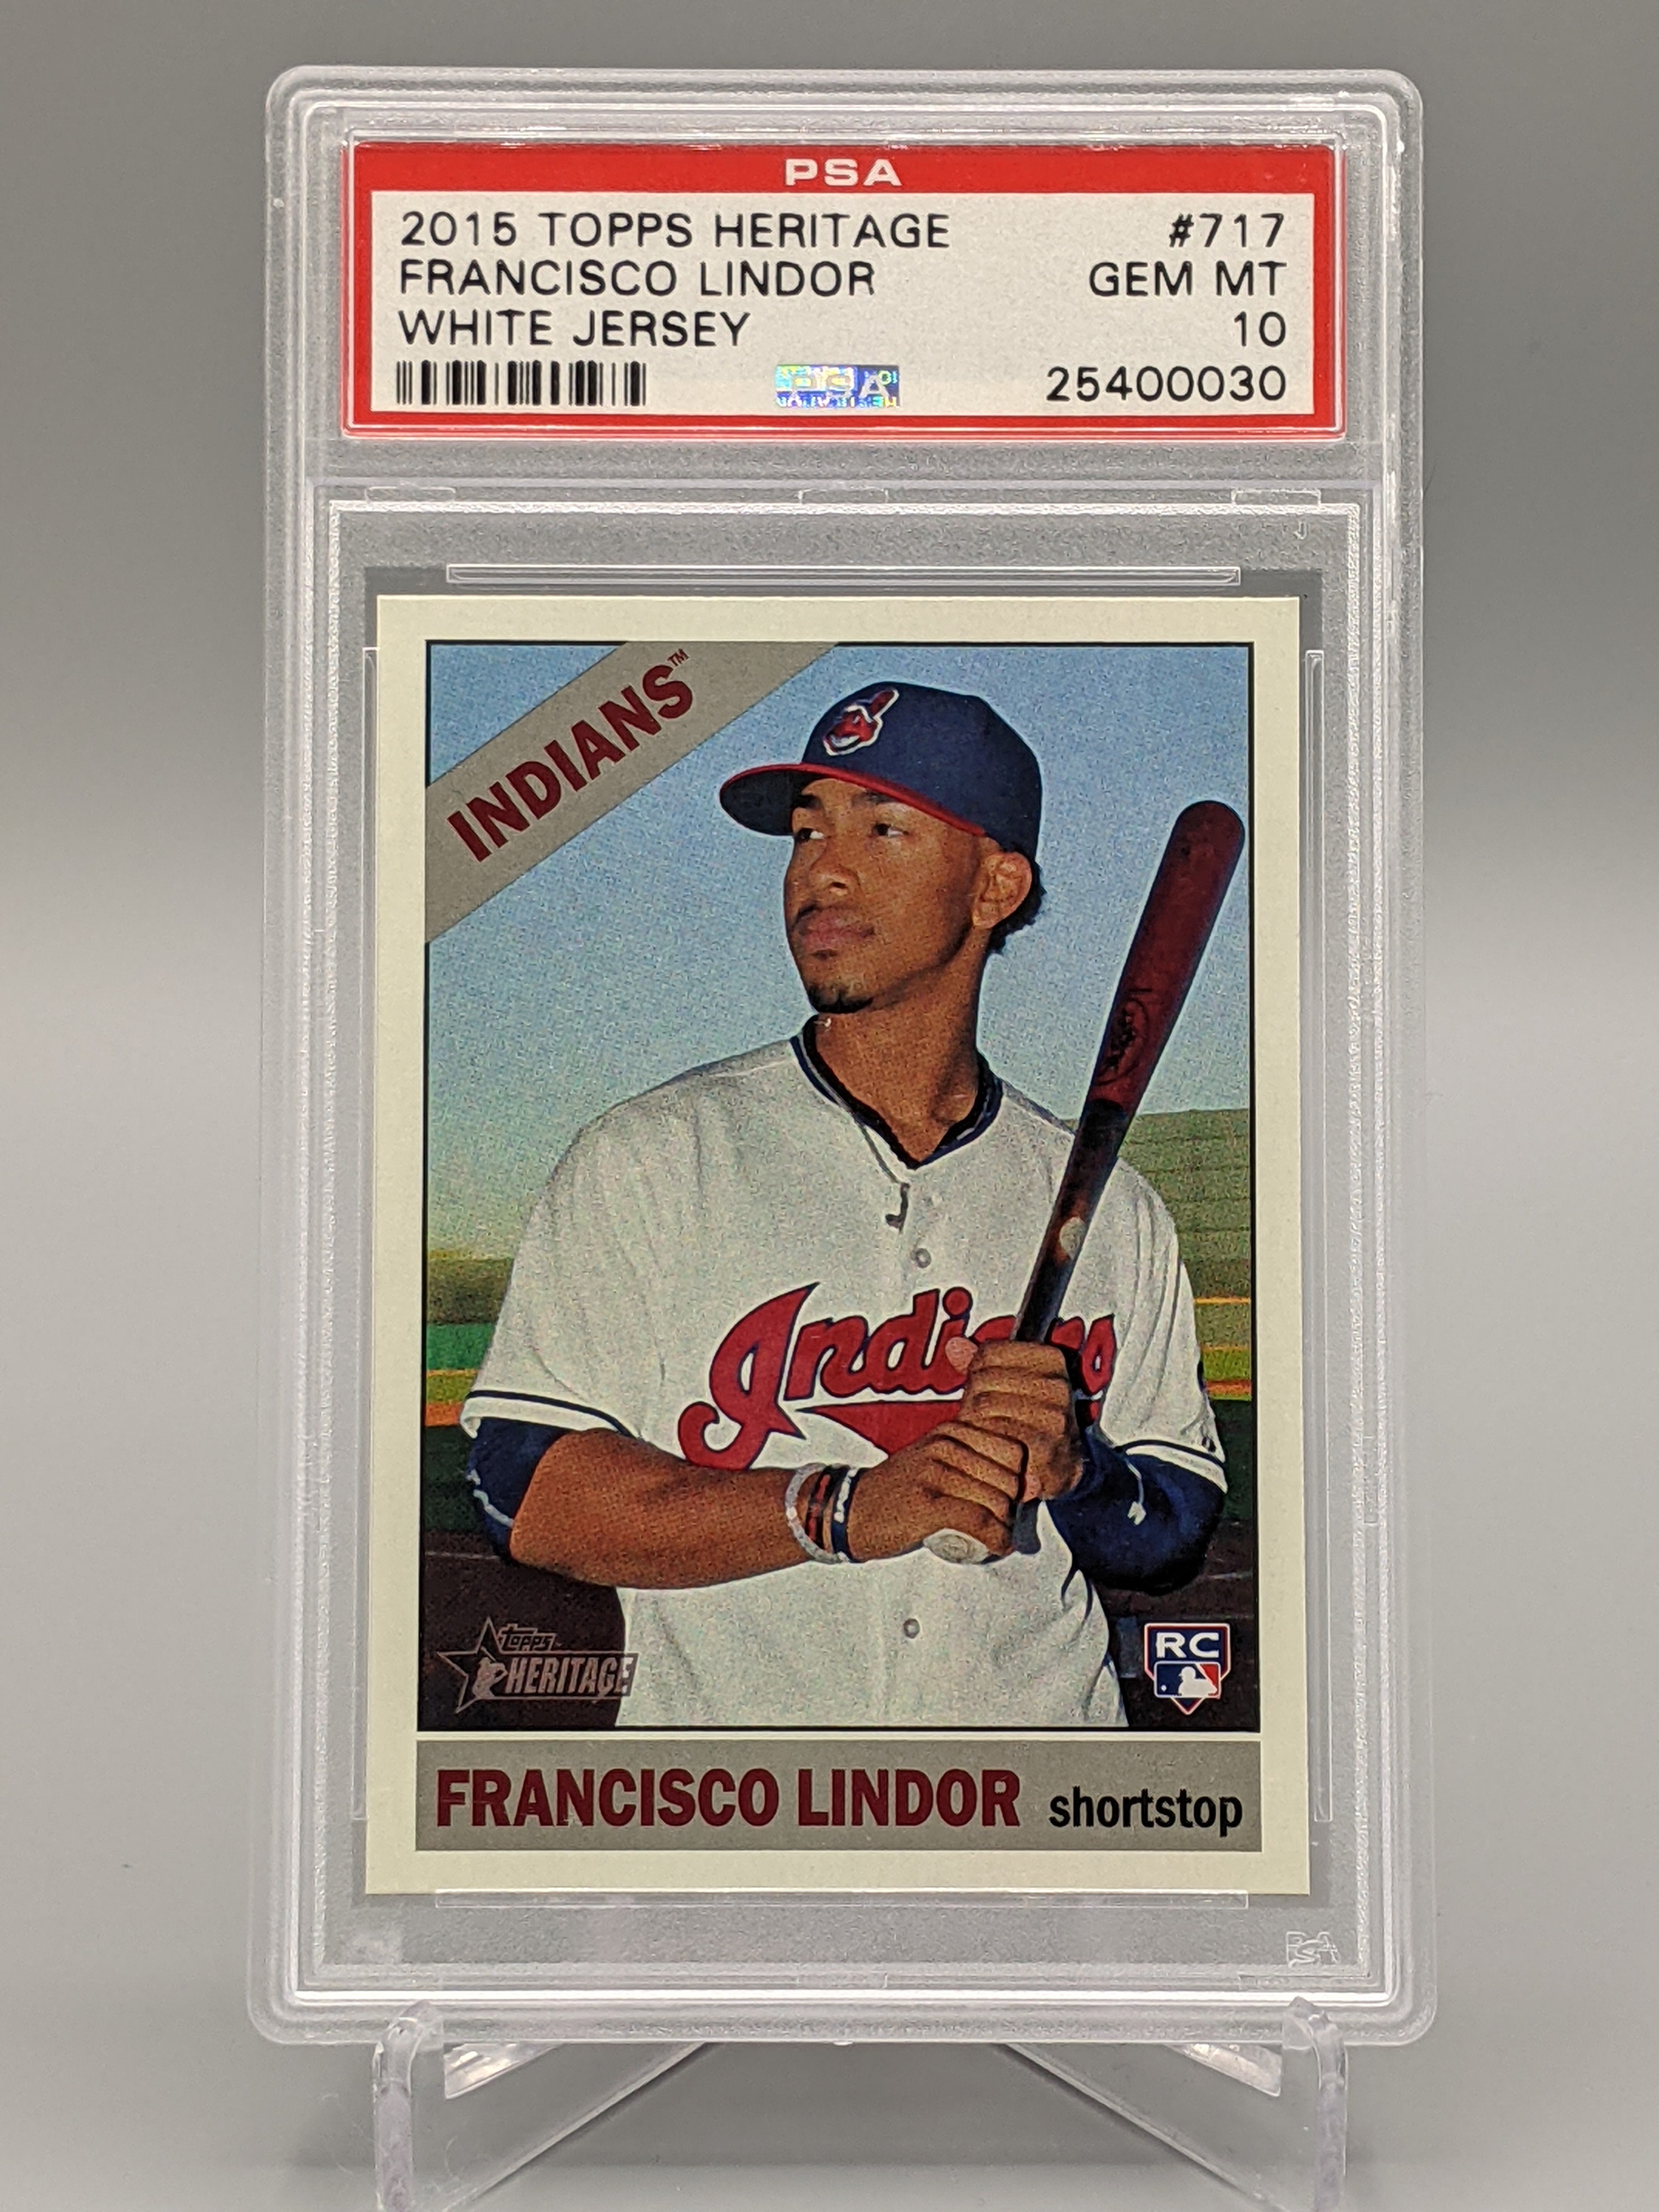 2015 Topps Heritage #717 Francisco Lindor RC White Jersey PSA 10 (BD) –  Chief Wahoo Sportscards